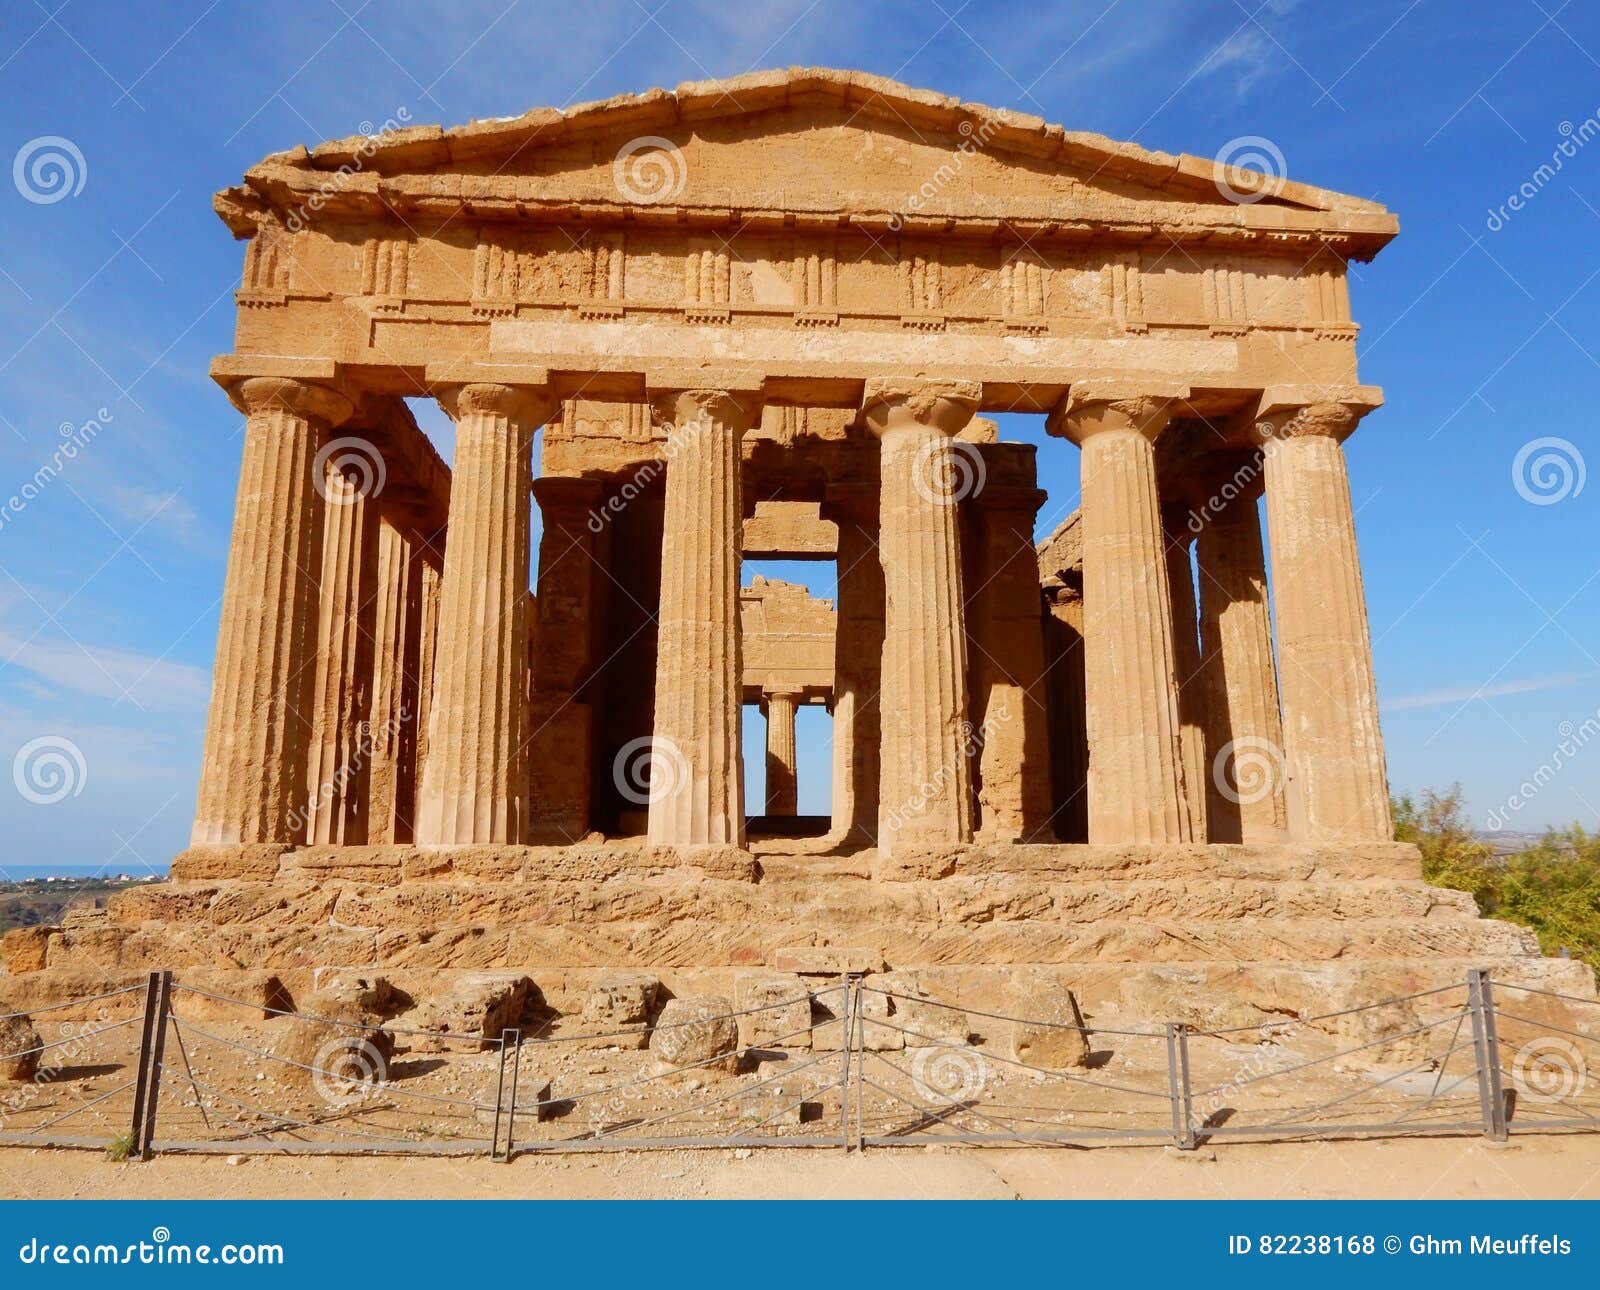 greek temple of concordia - valley of the temples - sicily